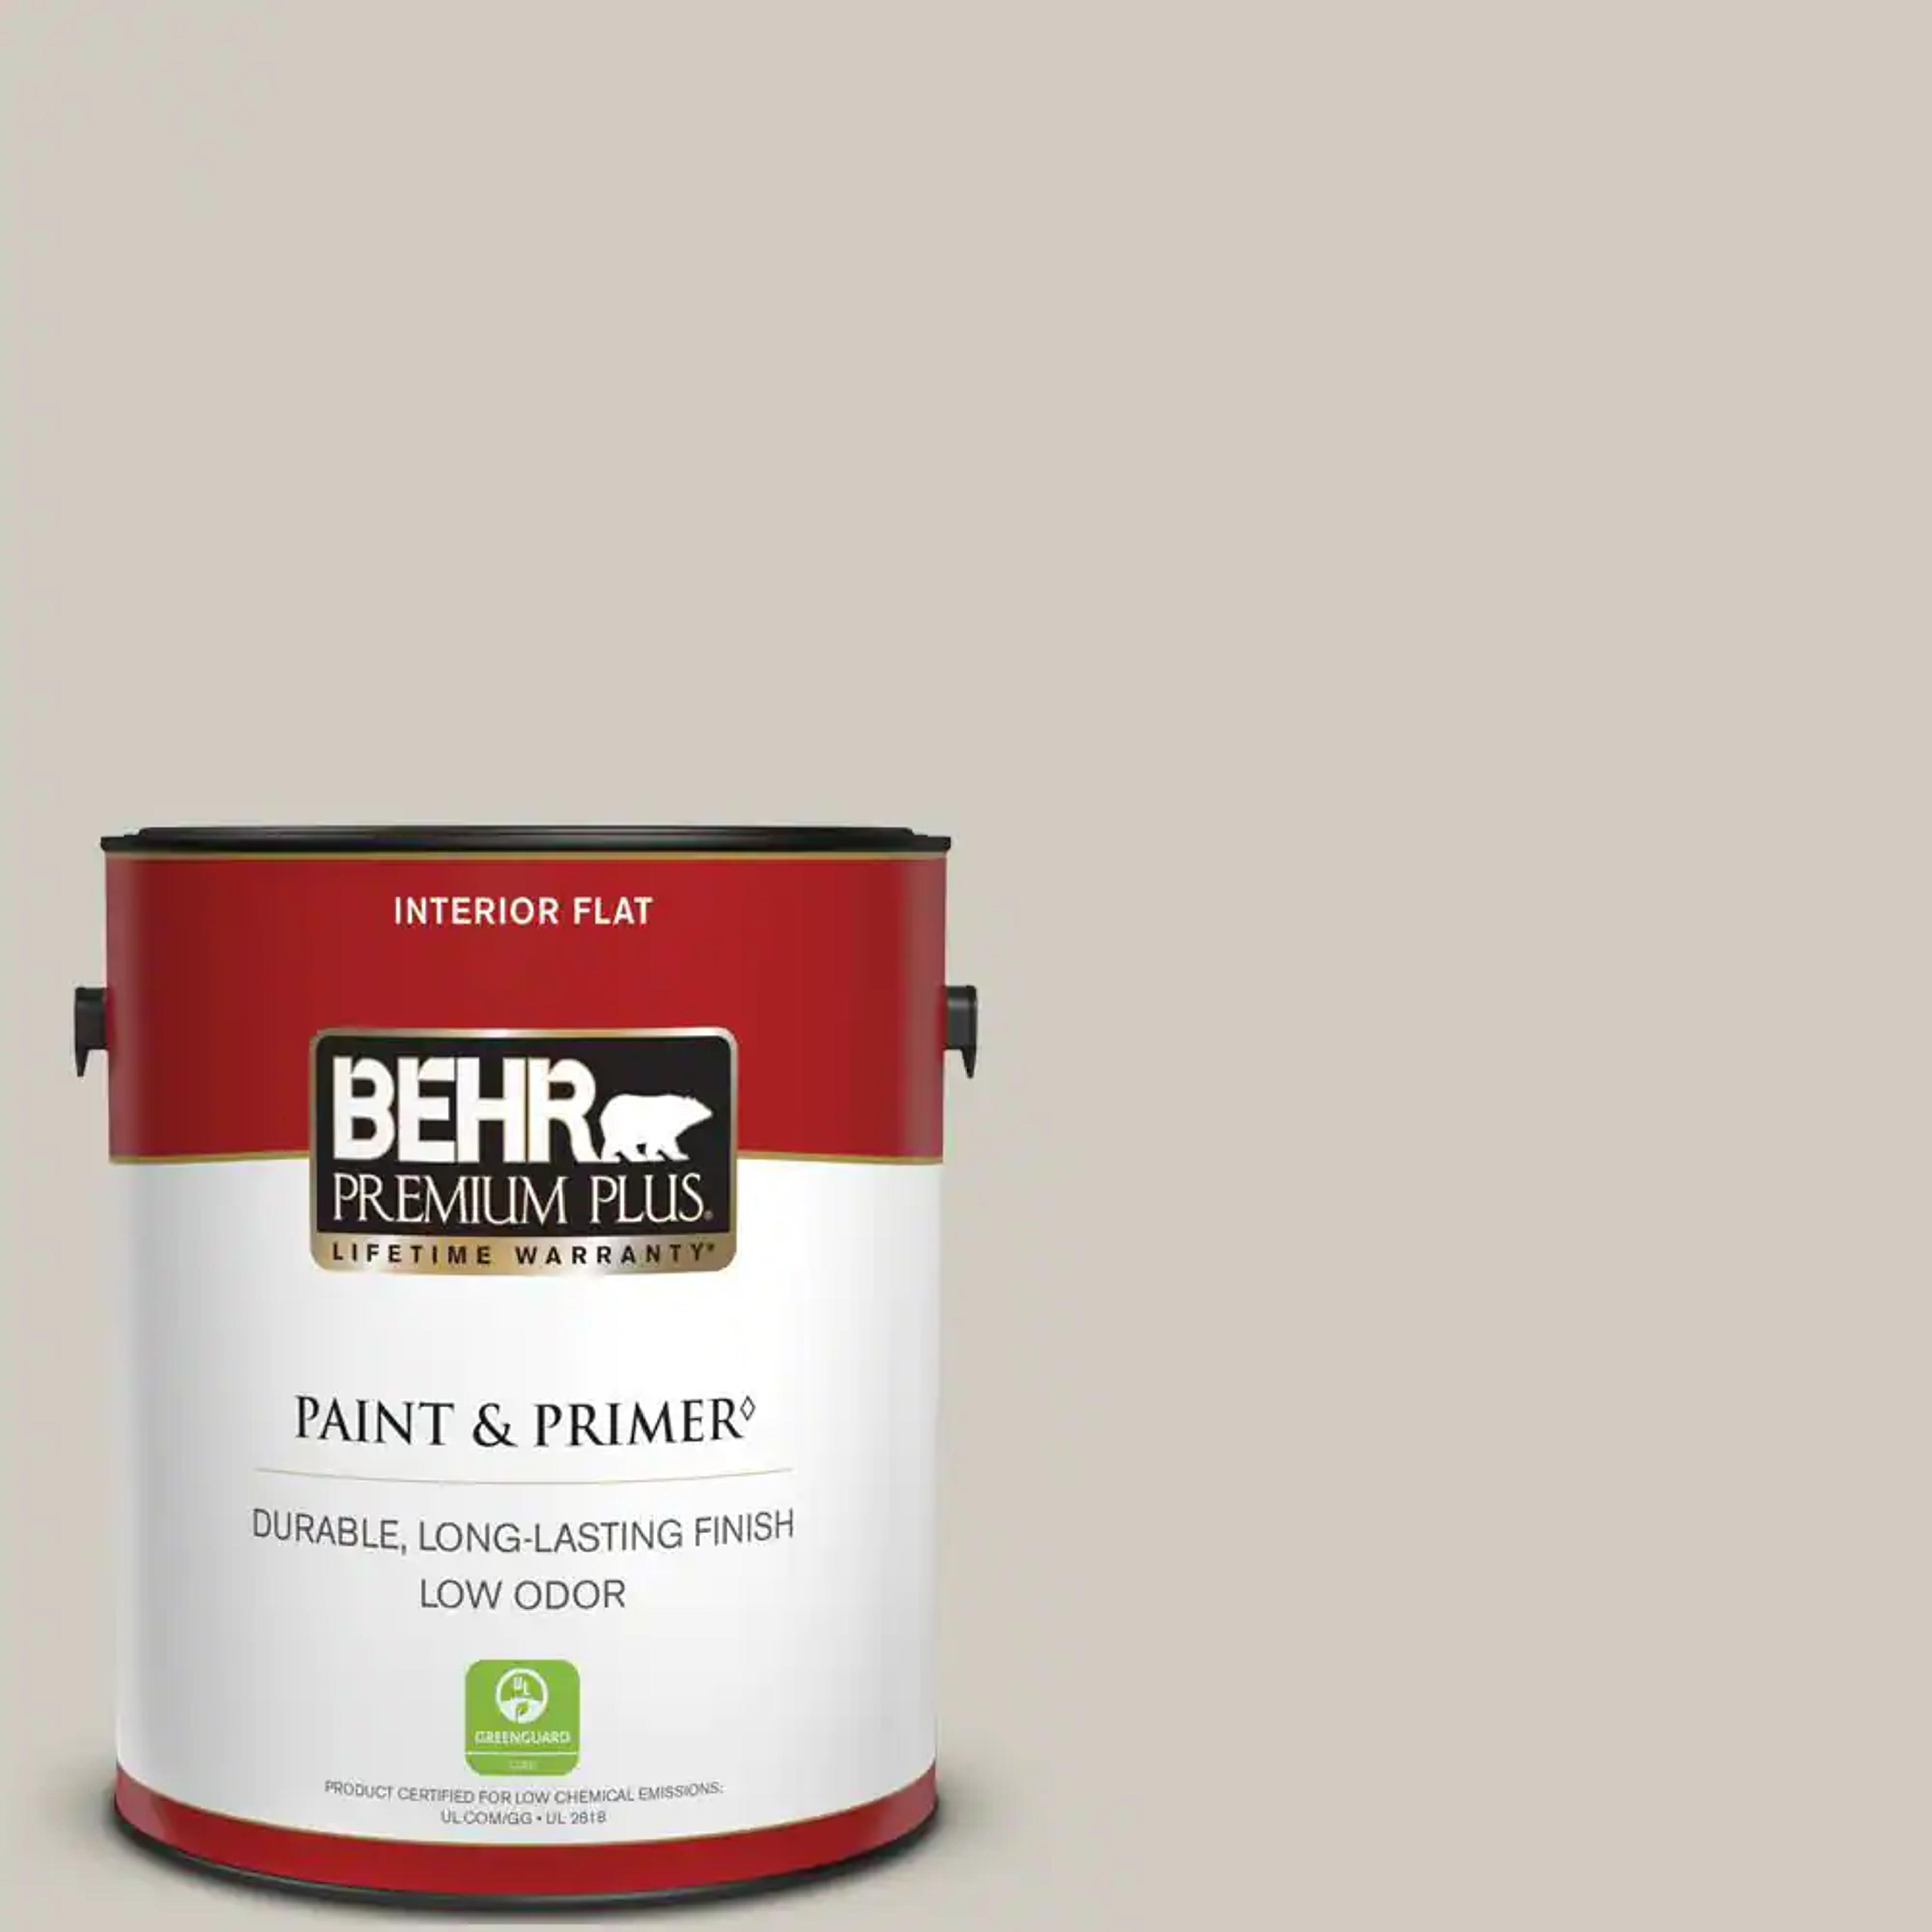 BEHR PREMIUM PLUS 1 gal. Designer Collection #DC-007 Tranquil Gray Flat Low Odor Interior Paint & Primer 105001 - The Home Depot